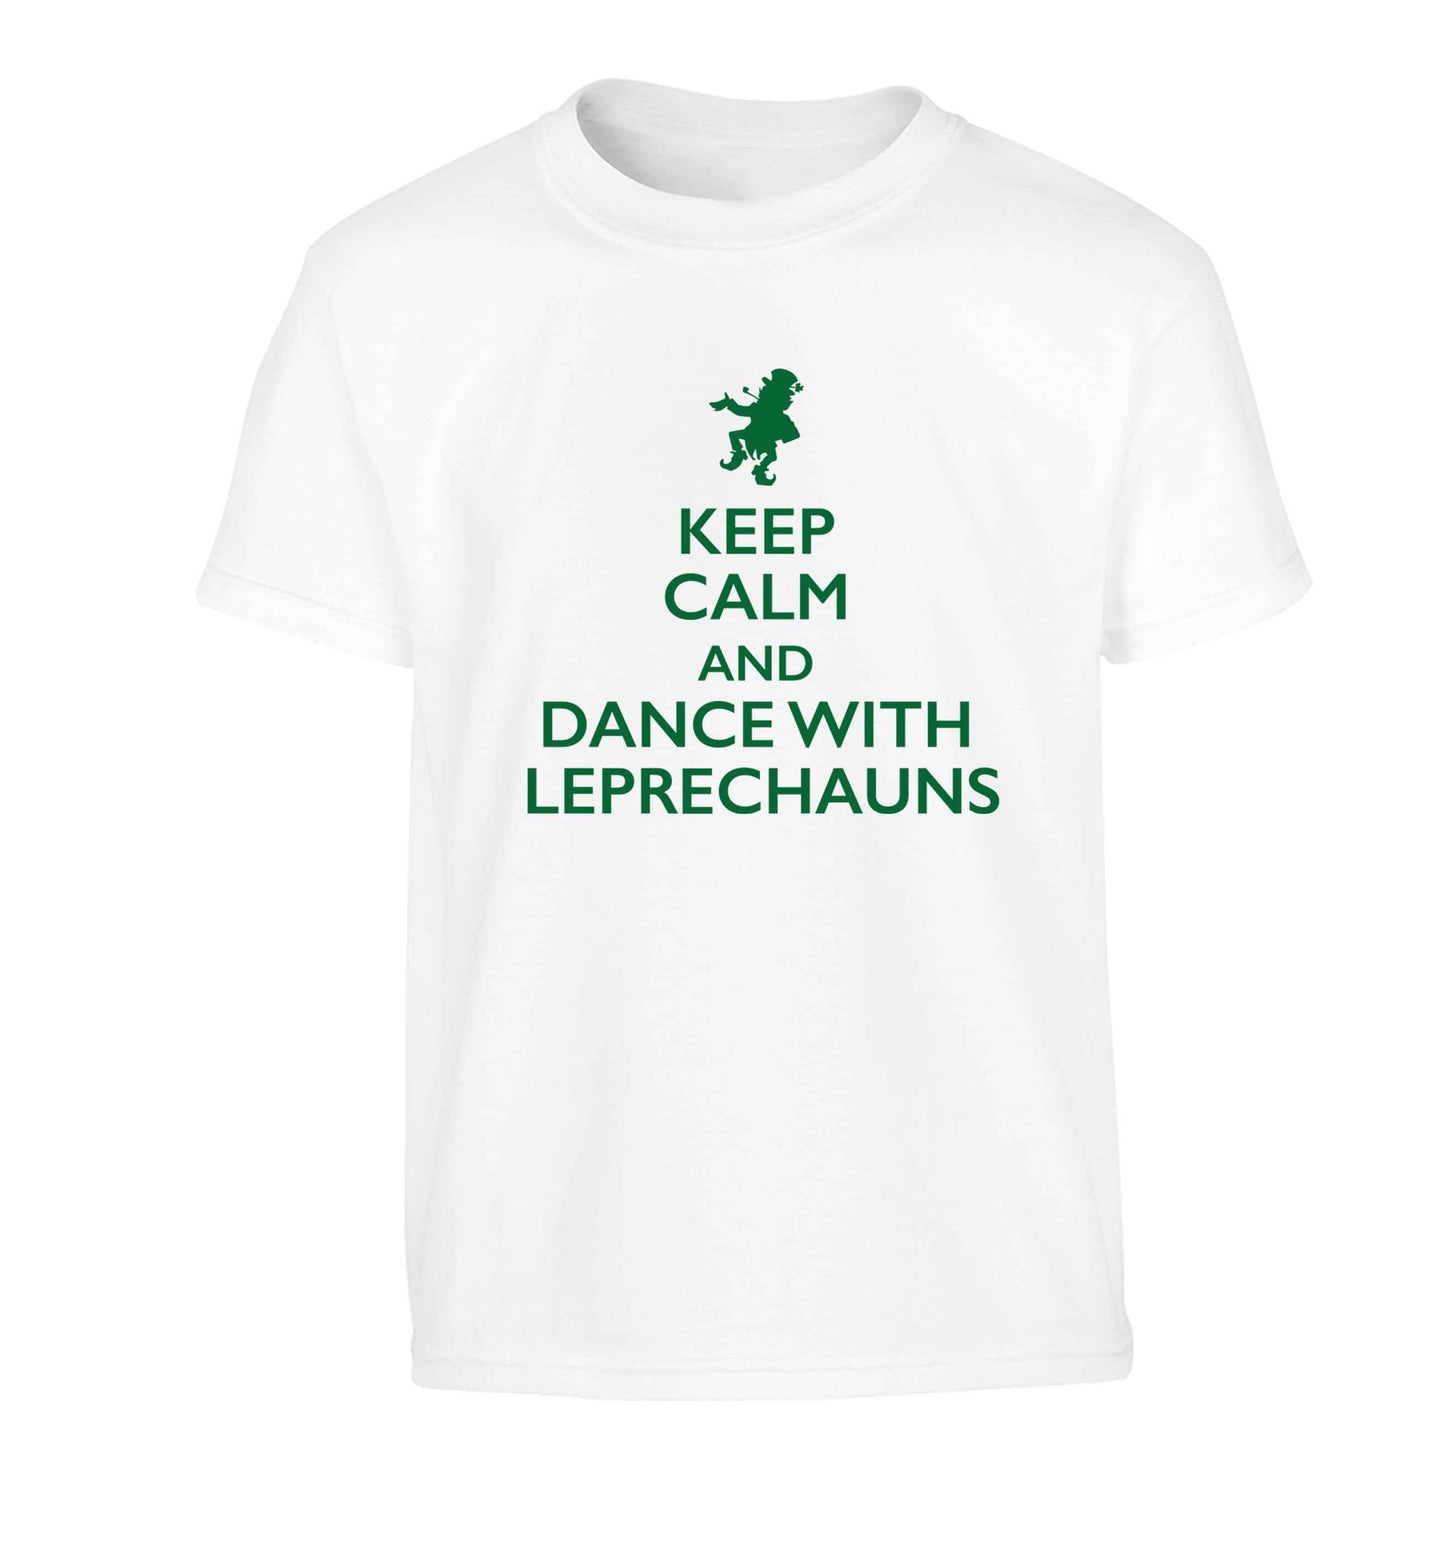 Keep calm and dance with leprechauns Children's white Tshirt 12-13 Years